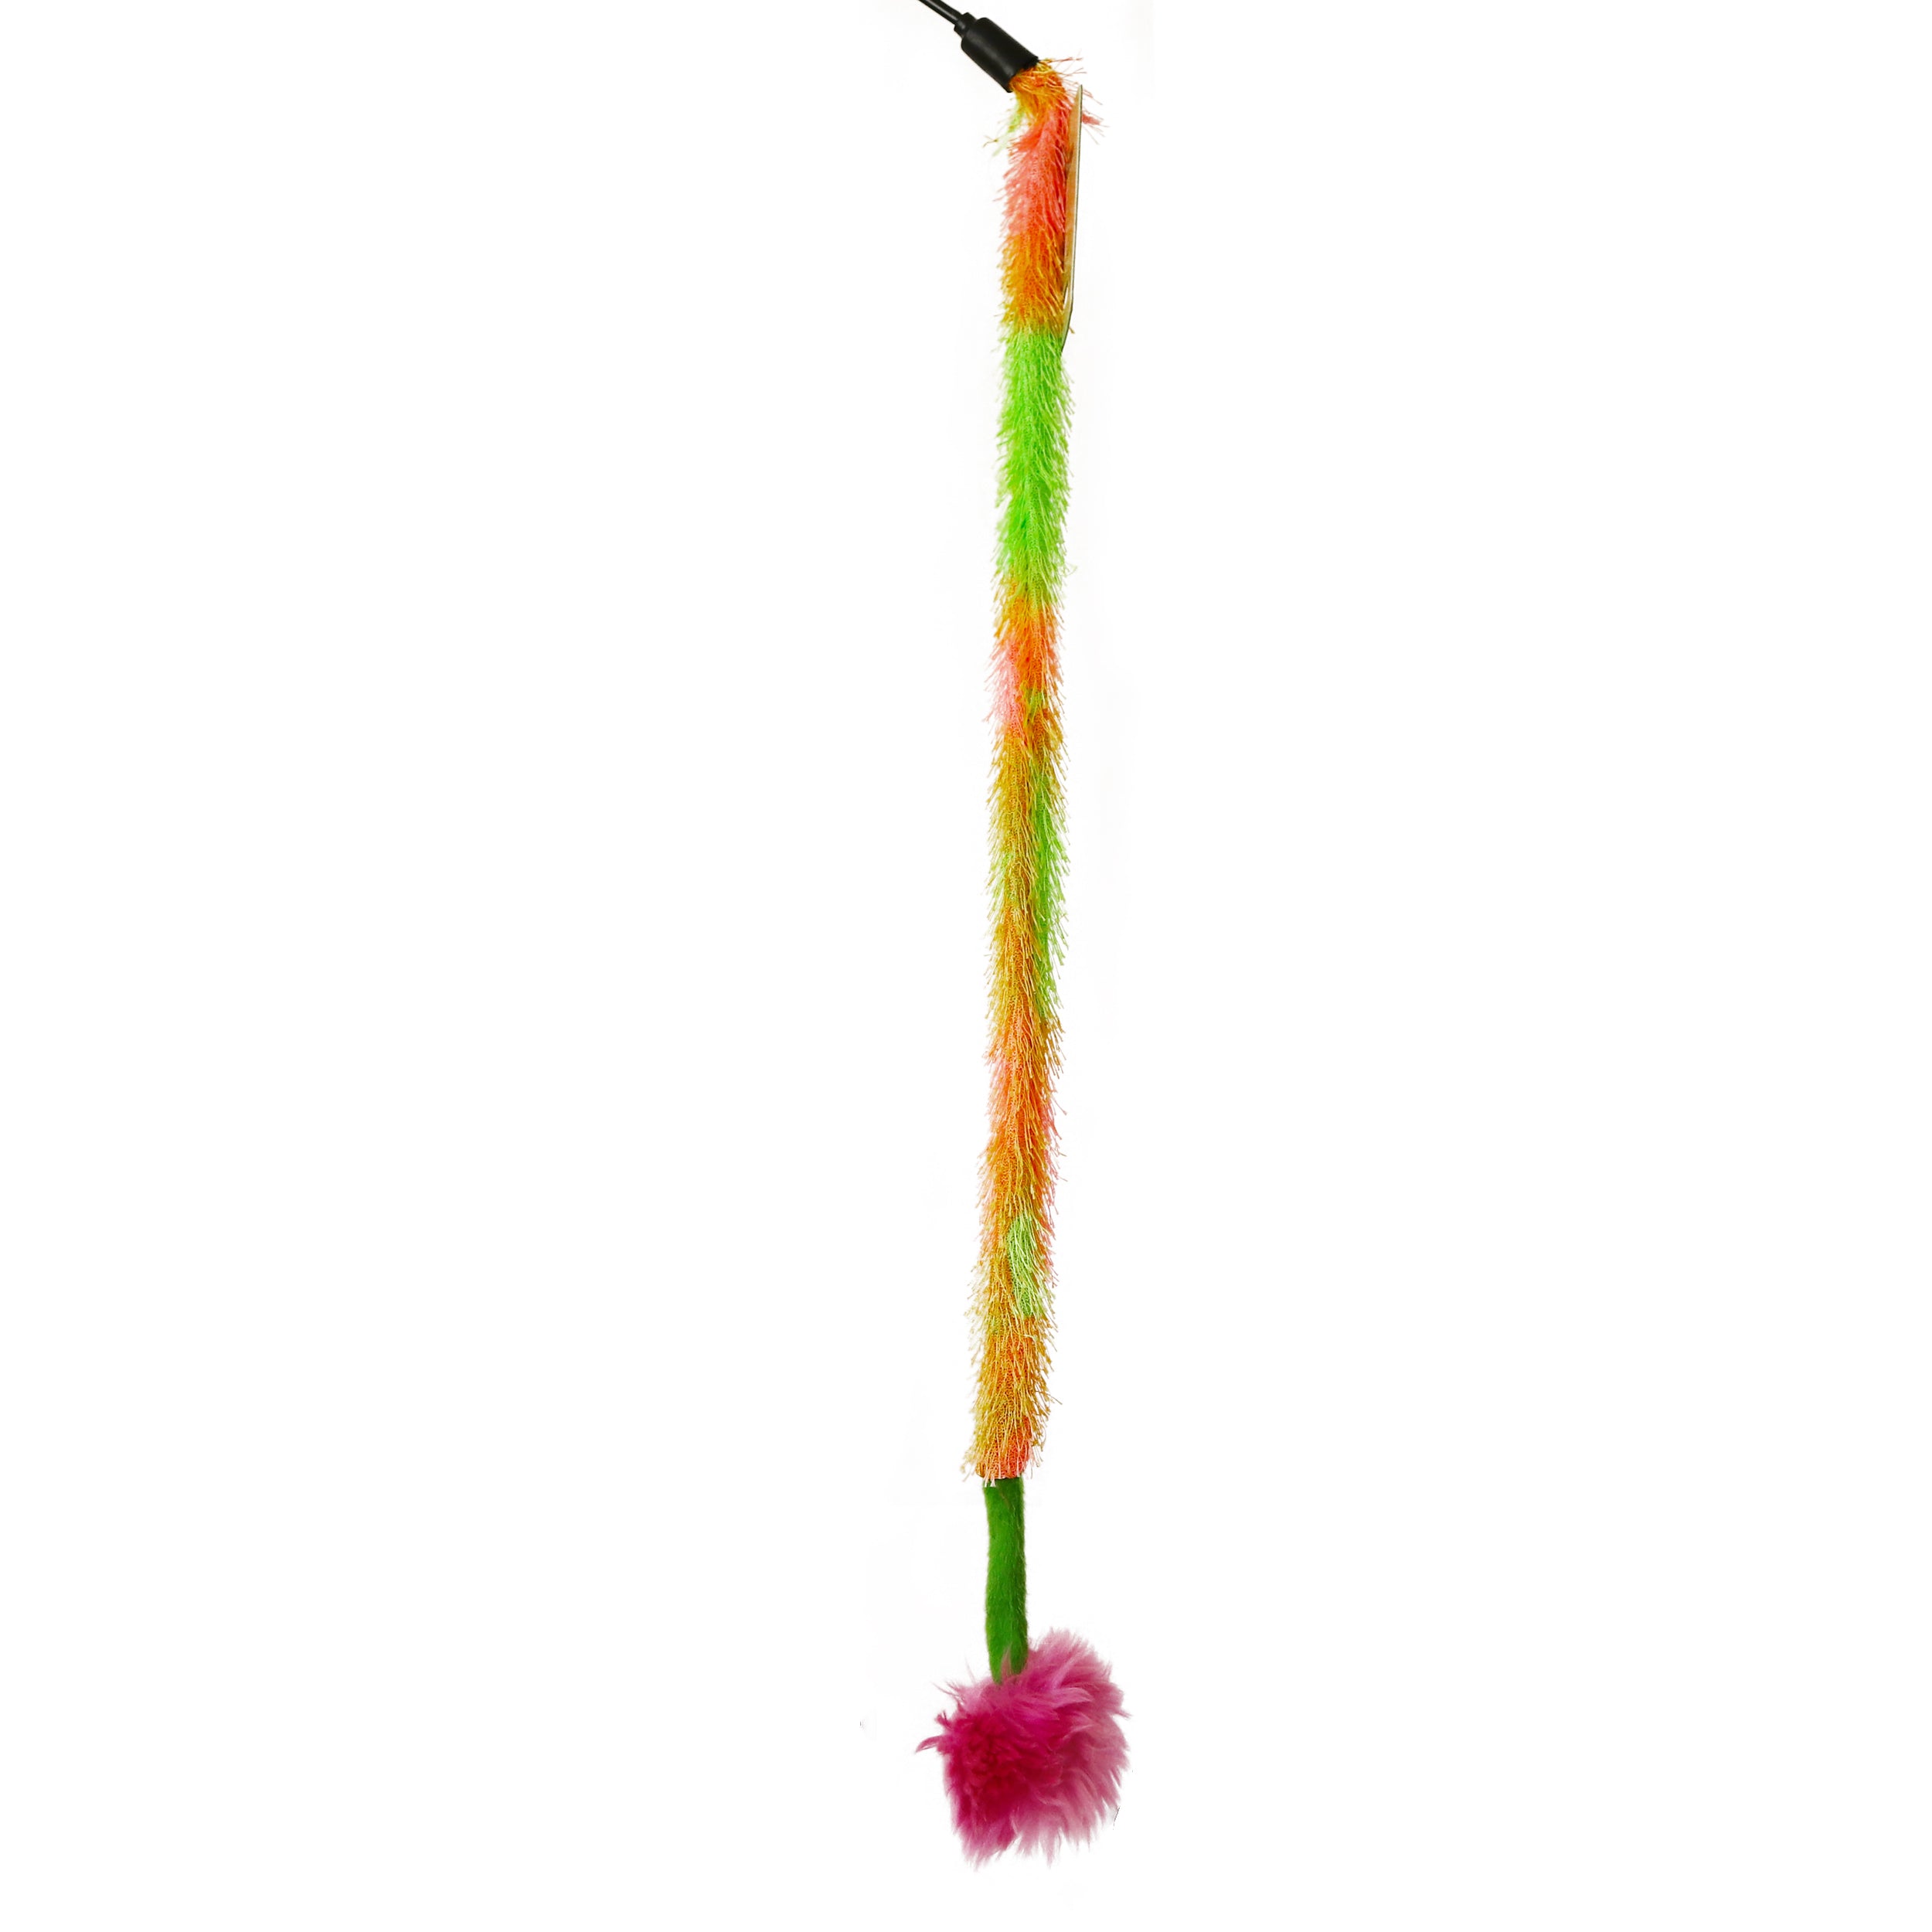 Interactive Crazy Cat Wand Stick toy Pink&Green with Pink Fuzzy Faux Fur Ball Fun String Cat toy for Cats and Kittens